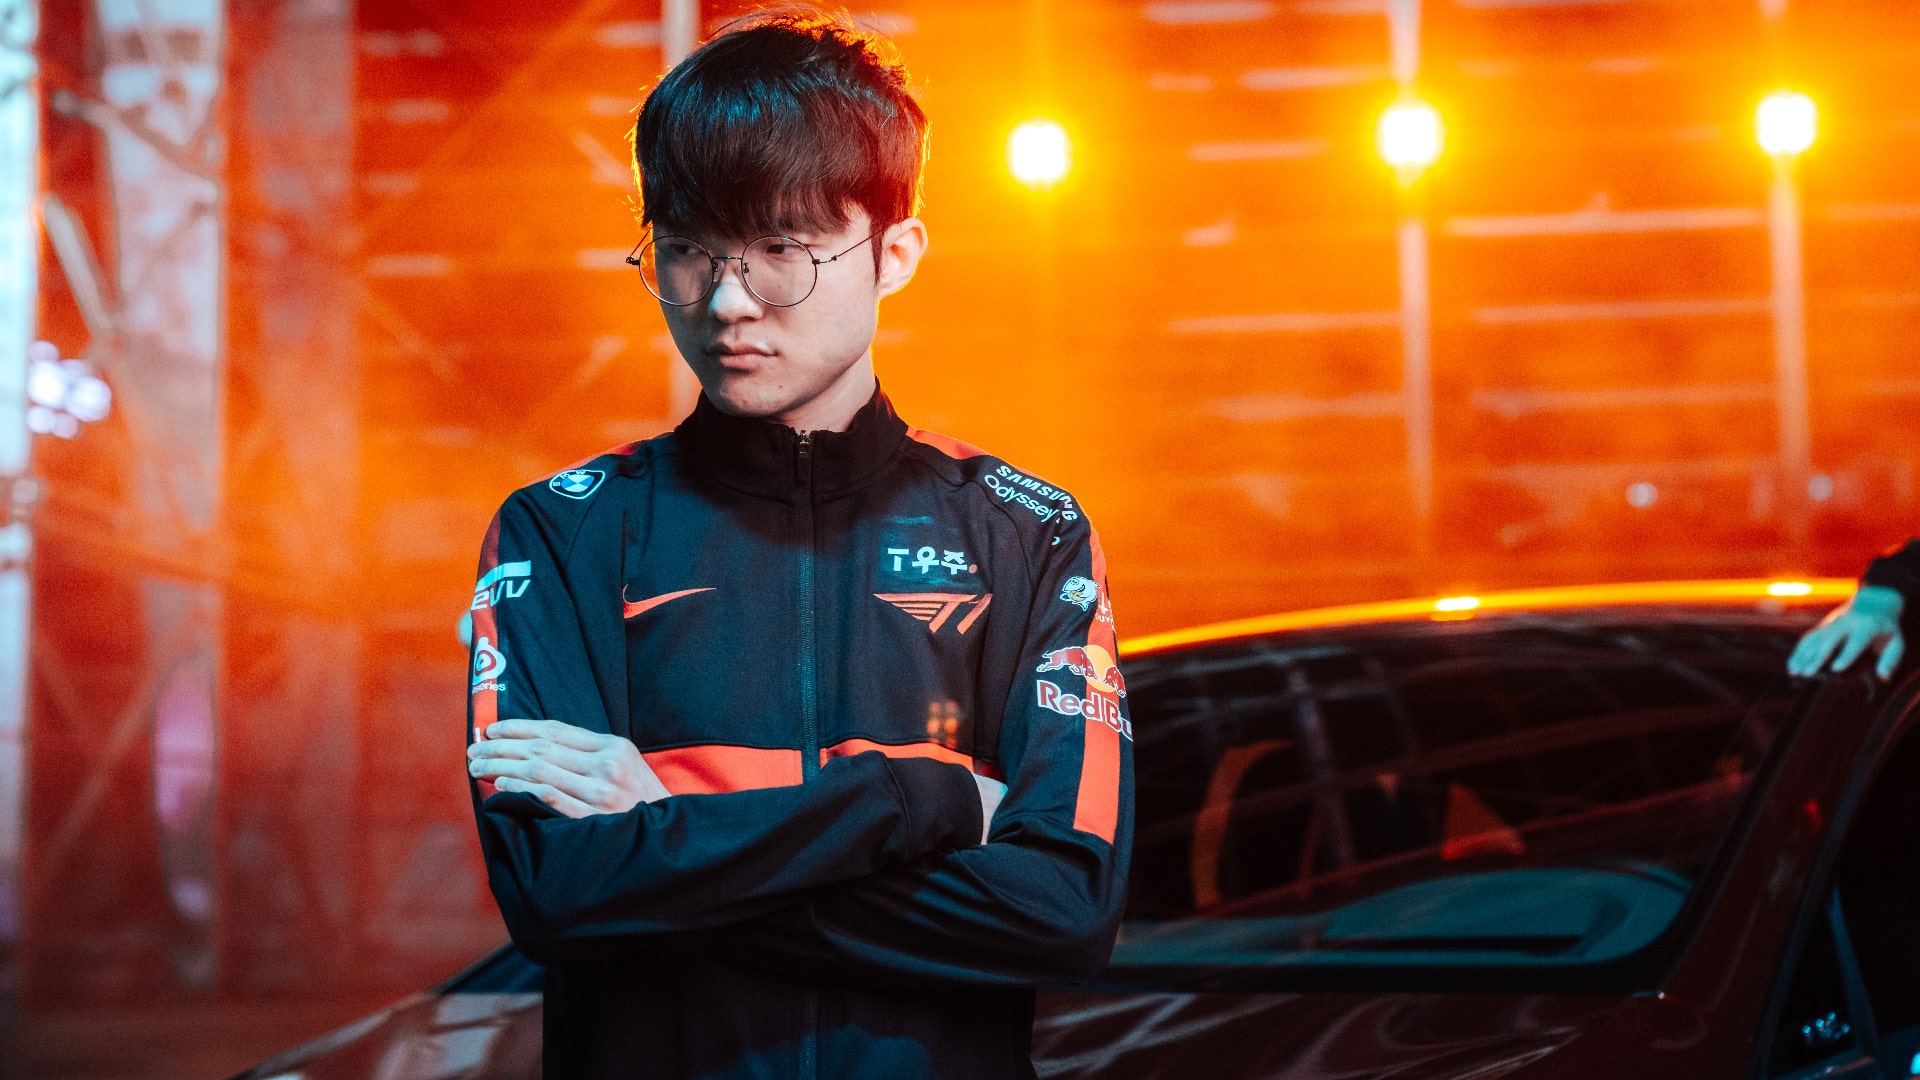 Faker, real name Lee Sang-hyeok, the top Korean esports League of News  Photo - Getty Images